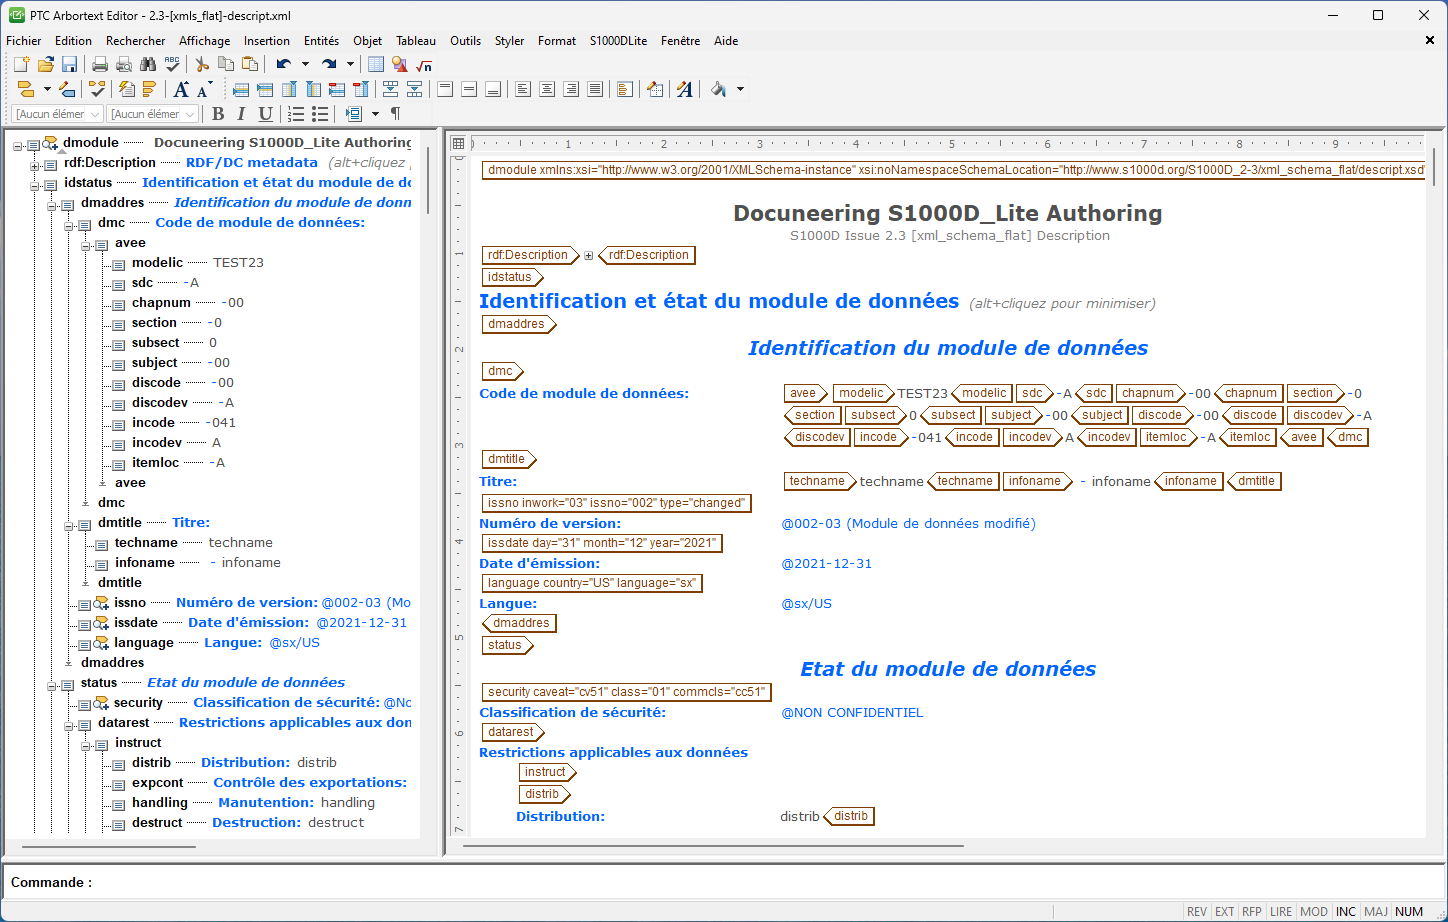 Docuneering S1000D_Lite Authoring - French [FR]